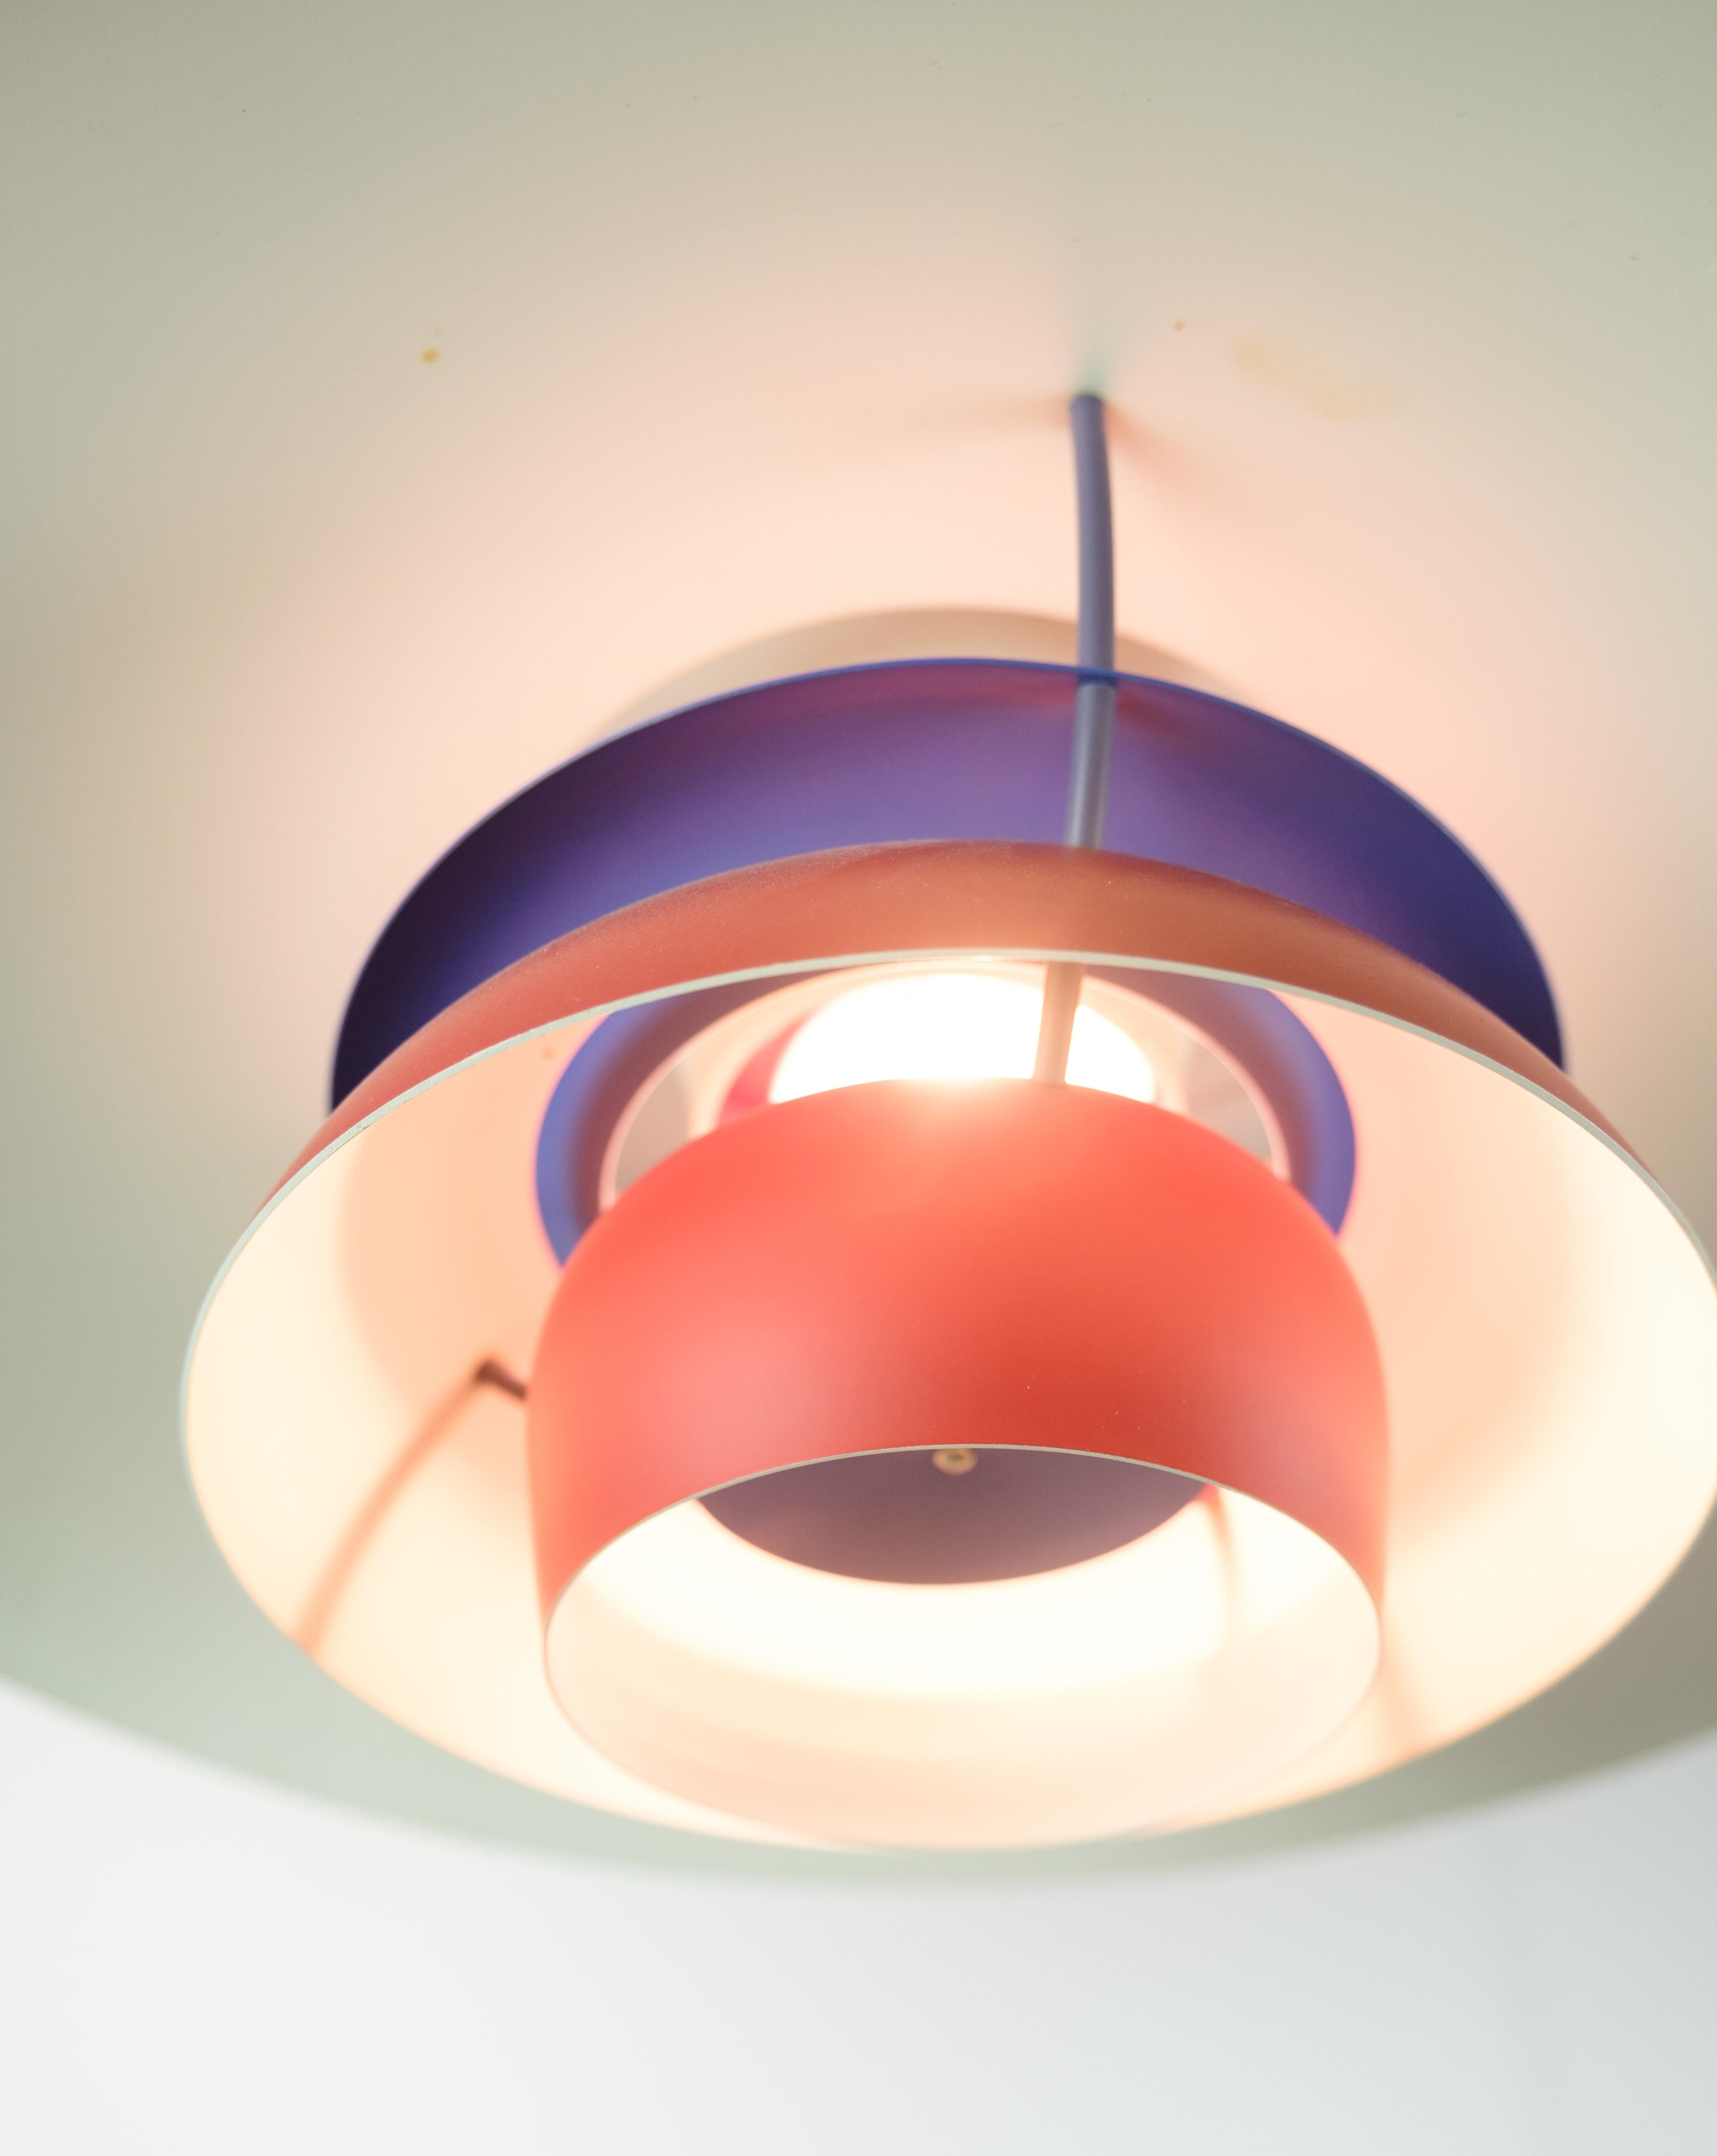 Mid-Century Modern Ceiling Lamp Model PH5 By Poul Henningsen From 1950s For Sale